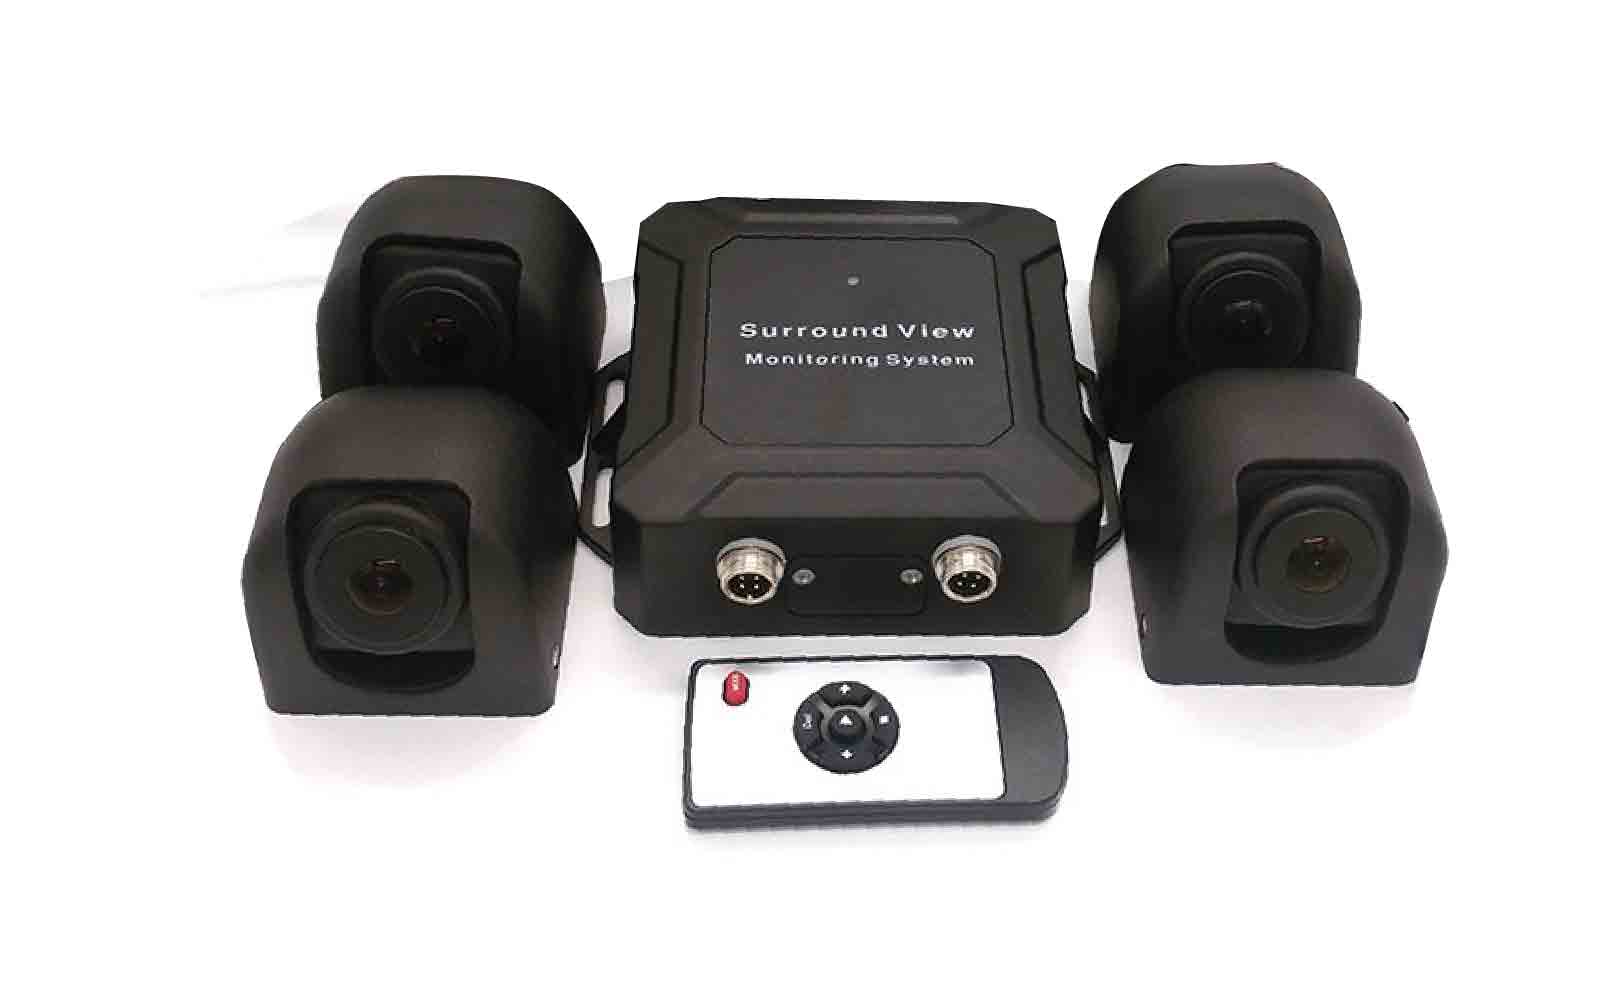 connected-dvr-surrounded-view-system